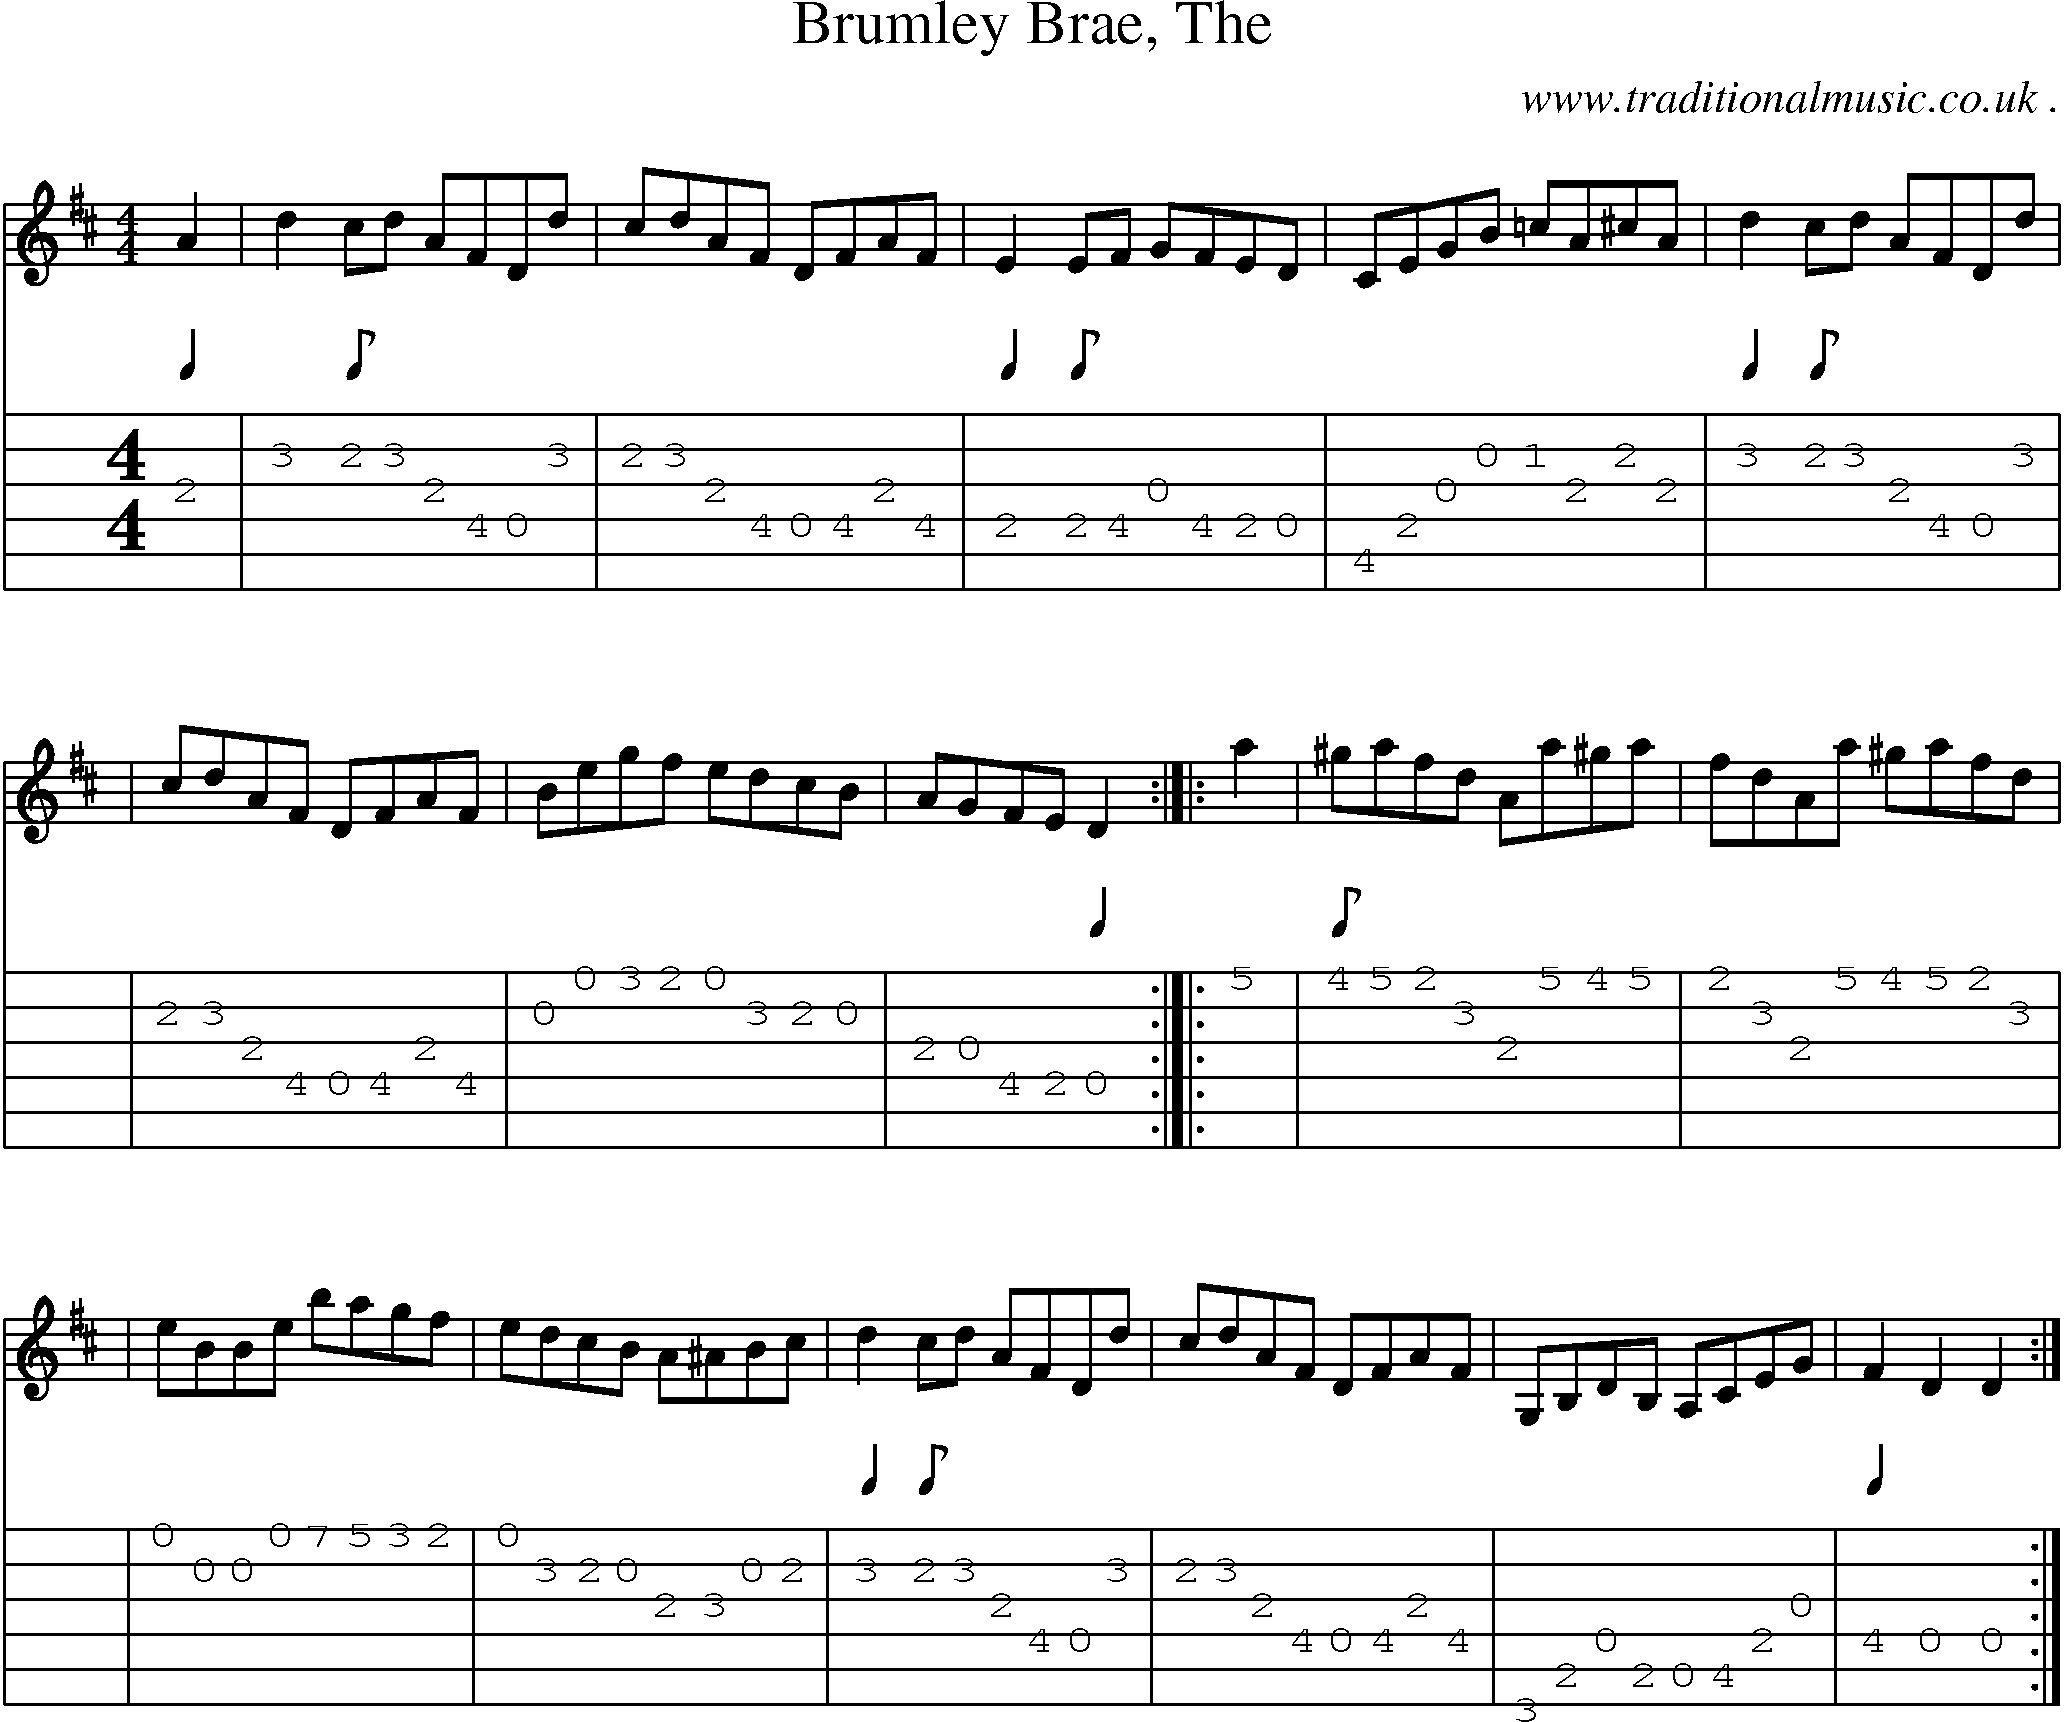 Sheet-music  score, Chords and Guitar Tabs for Brumley Brae The